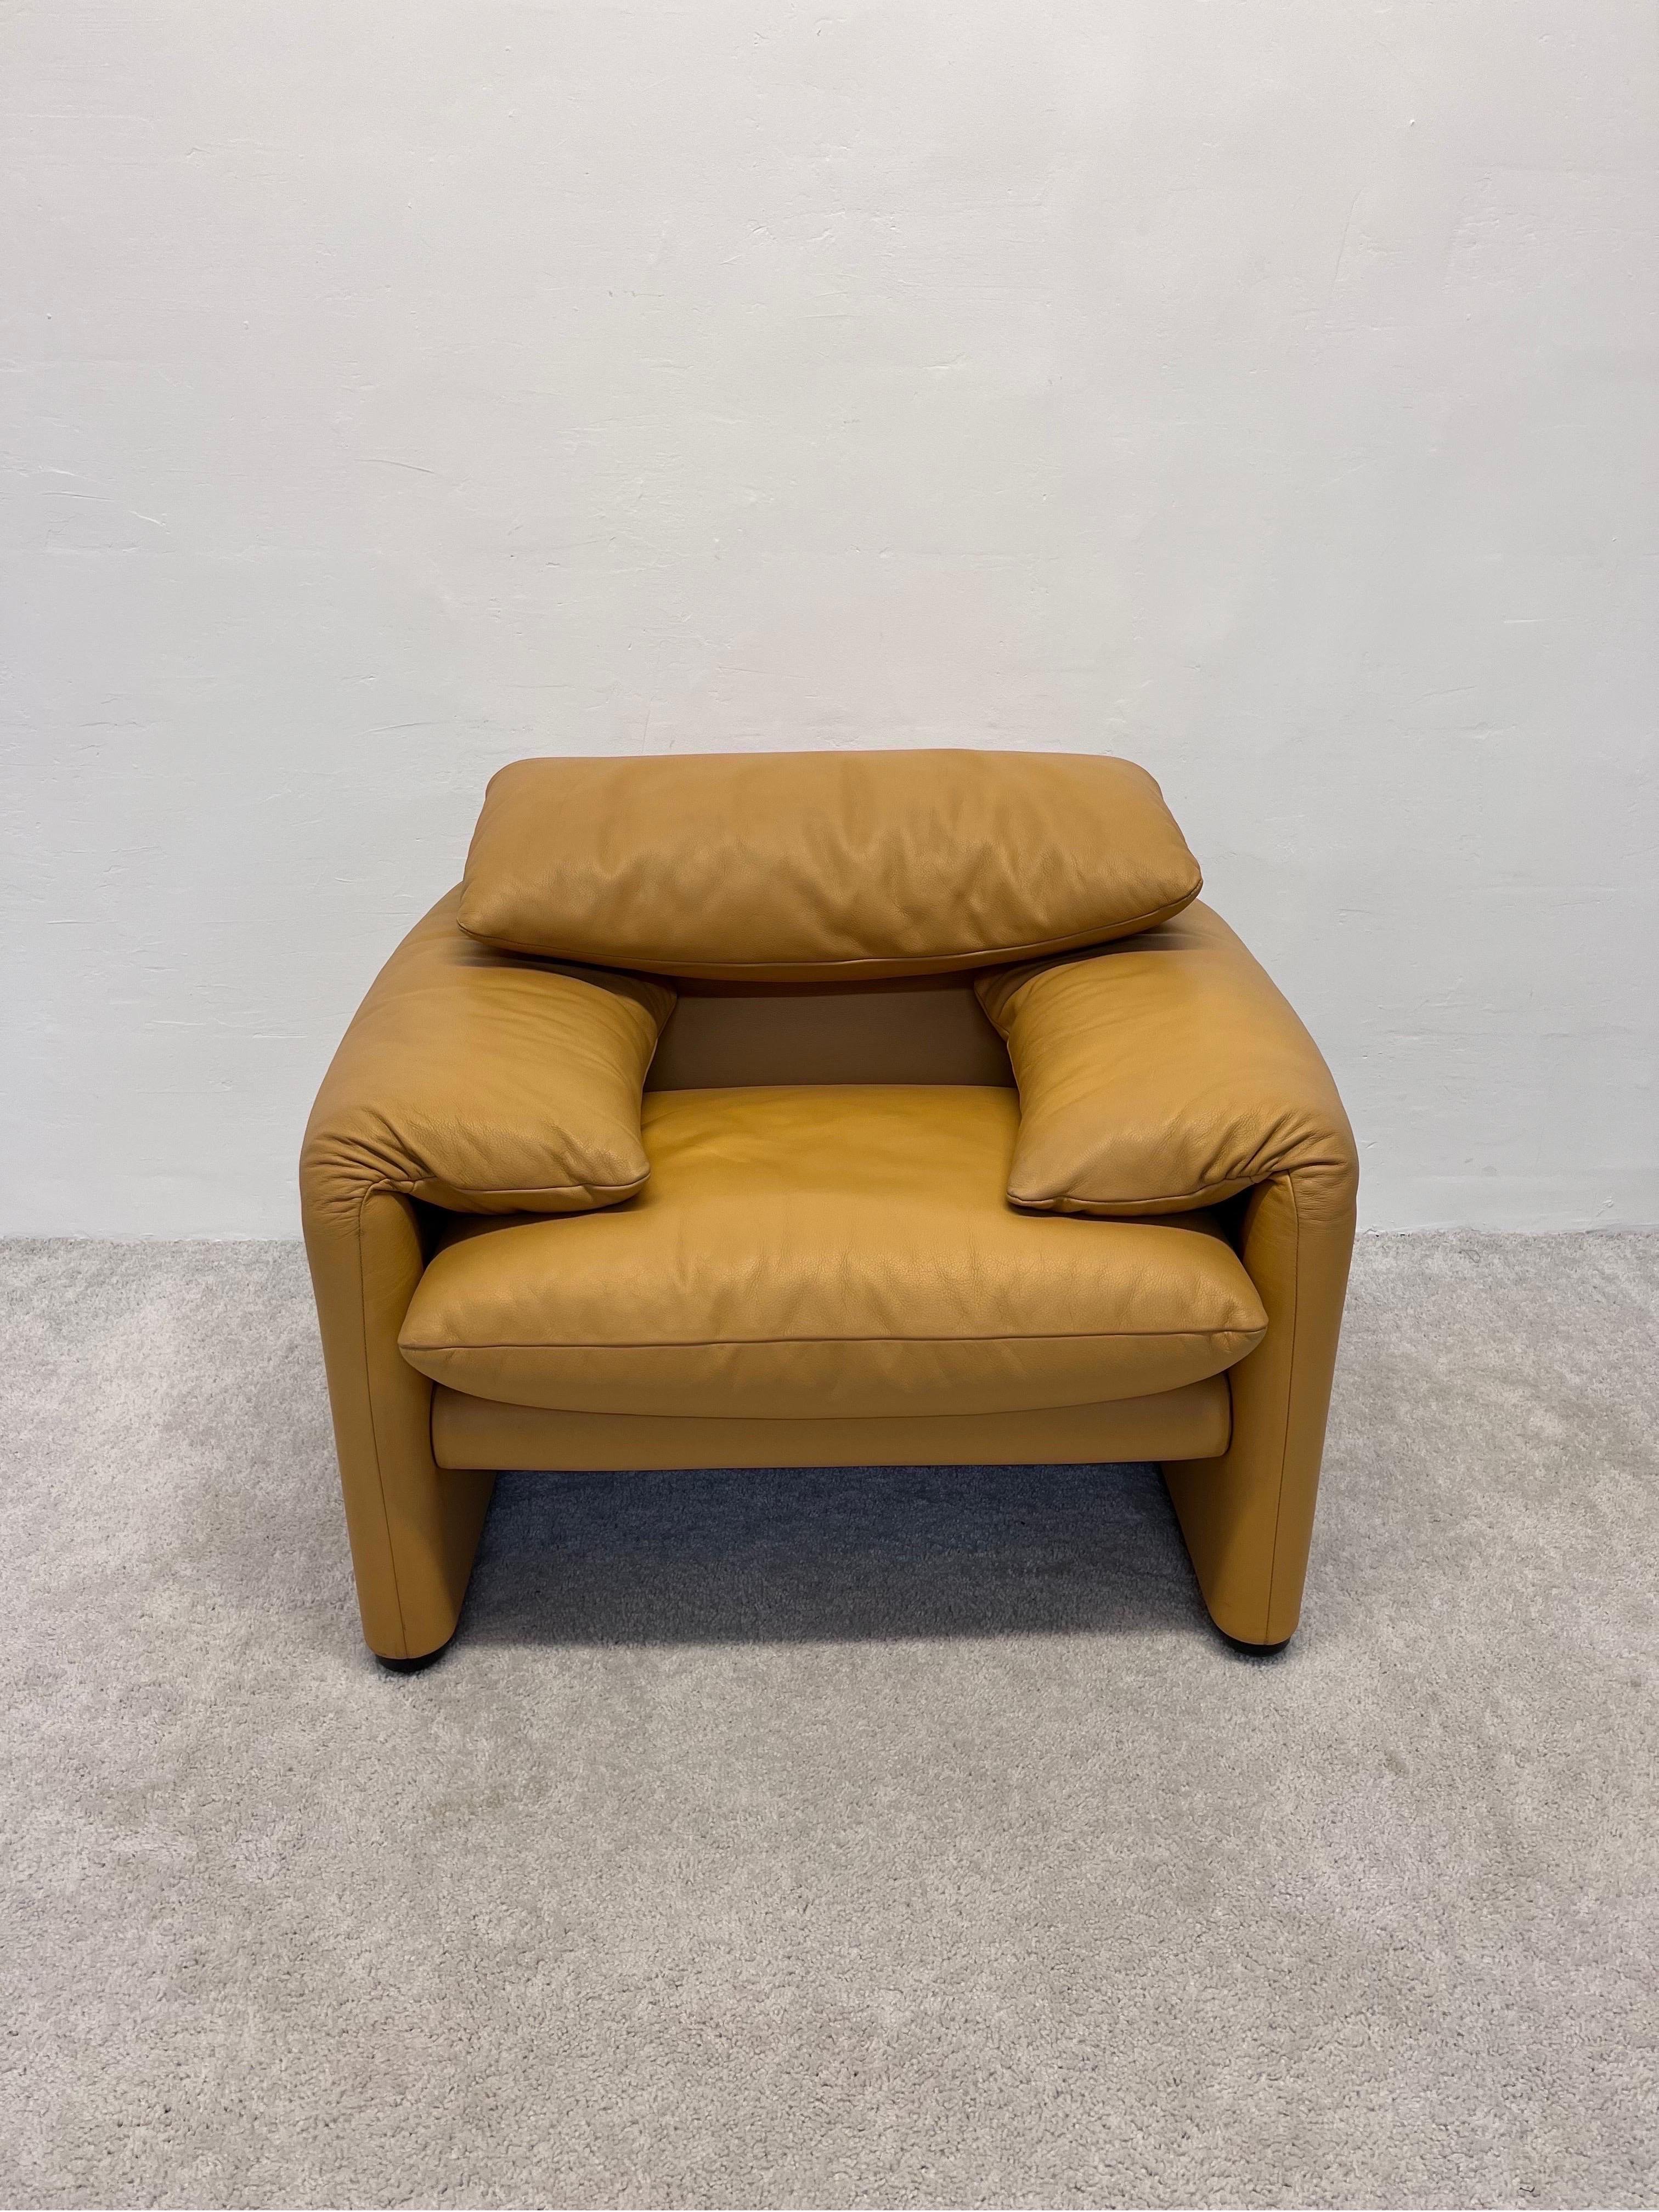 Maralunga lounge chair with the defining adjustable head rest designed by Vico Magistretti for Cassina. Original yellowish tan leather. The Maralunga was originally designed in the 1973 and this example was produced by Cassina circa 1980s.

Vico